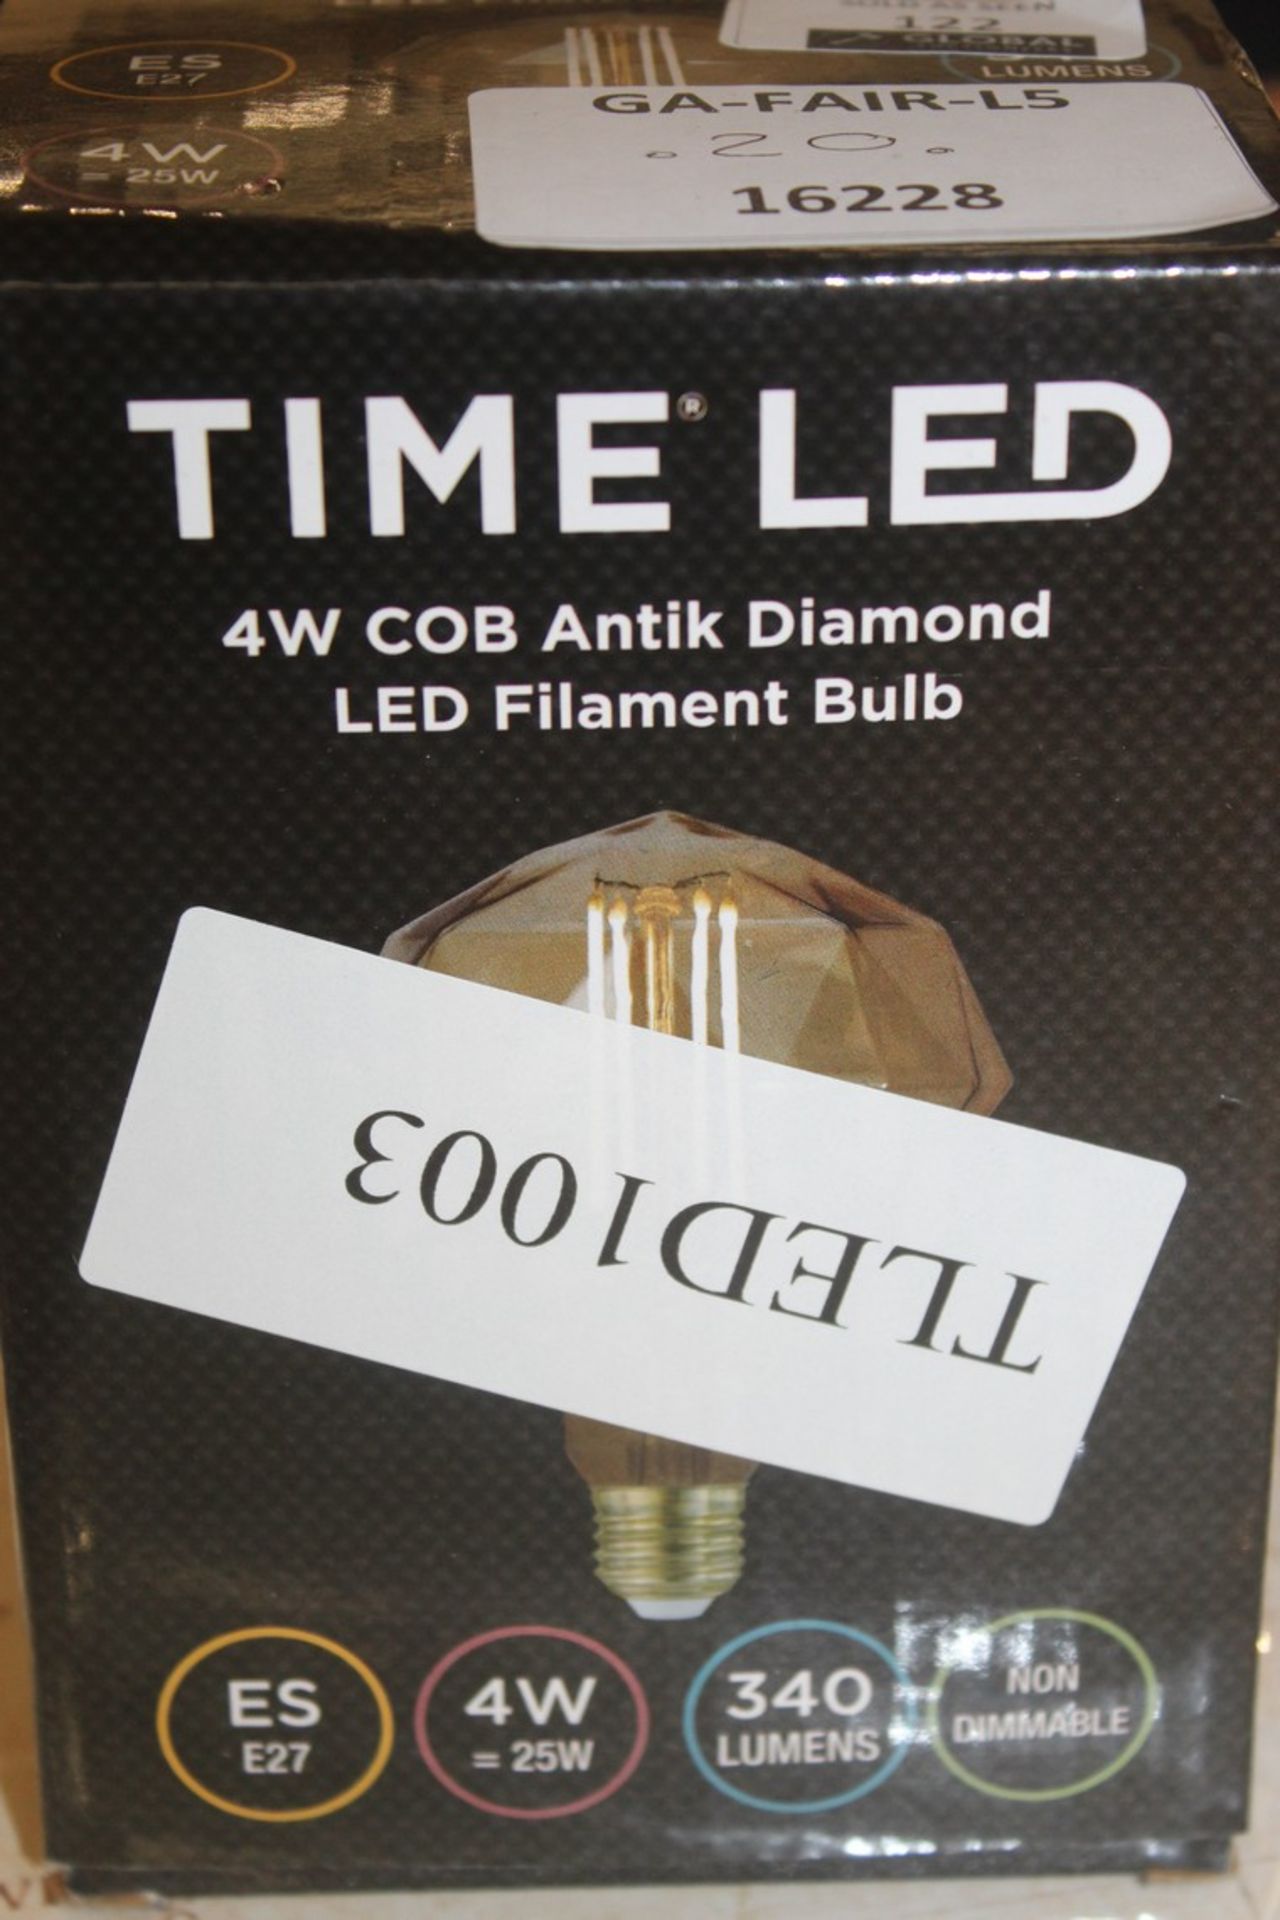 Lot To Contain 2 Time LED Antik Diamond LED Filament Light Bulb Combined RRP £60 (16228) (Pictures